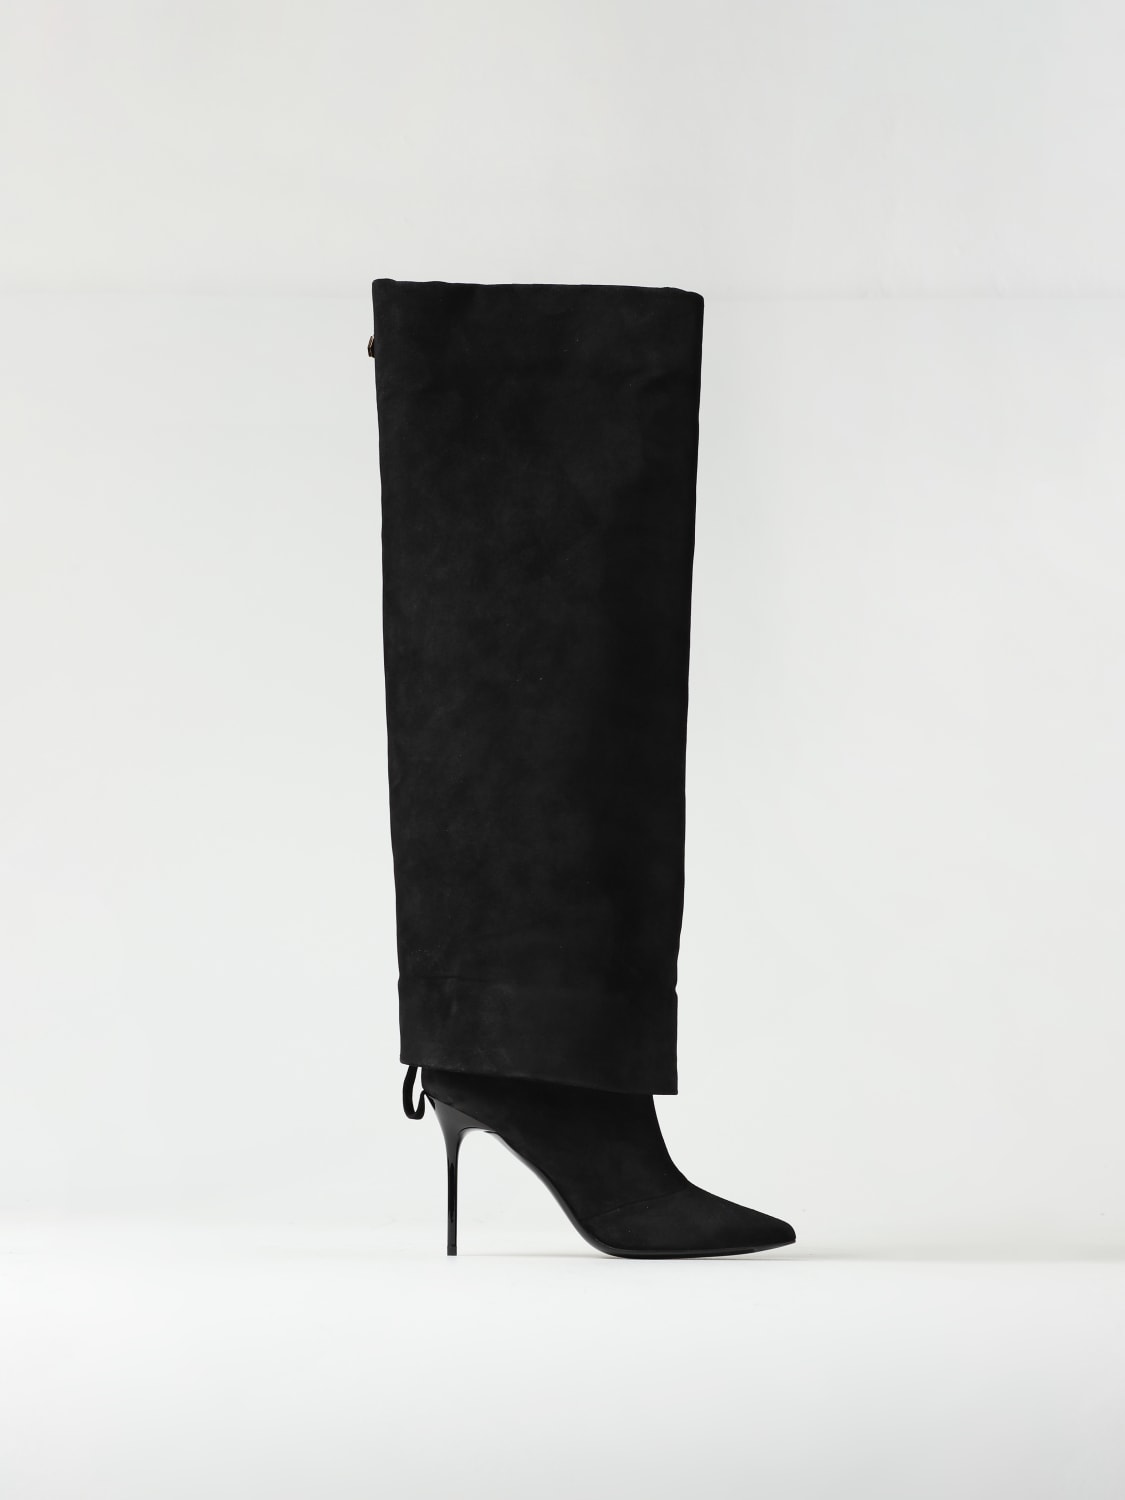 boots for woman - Black | Balmain boots BN1TA897LCTA online at GIGLIO.COM